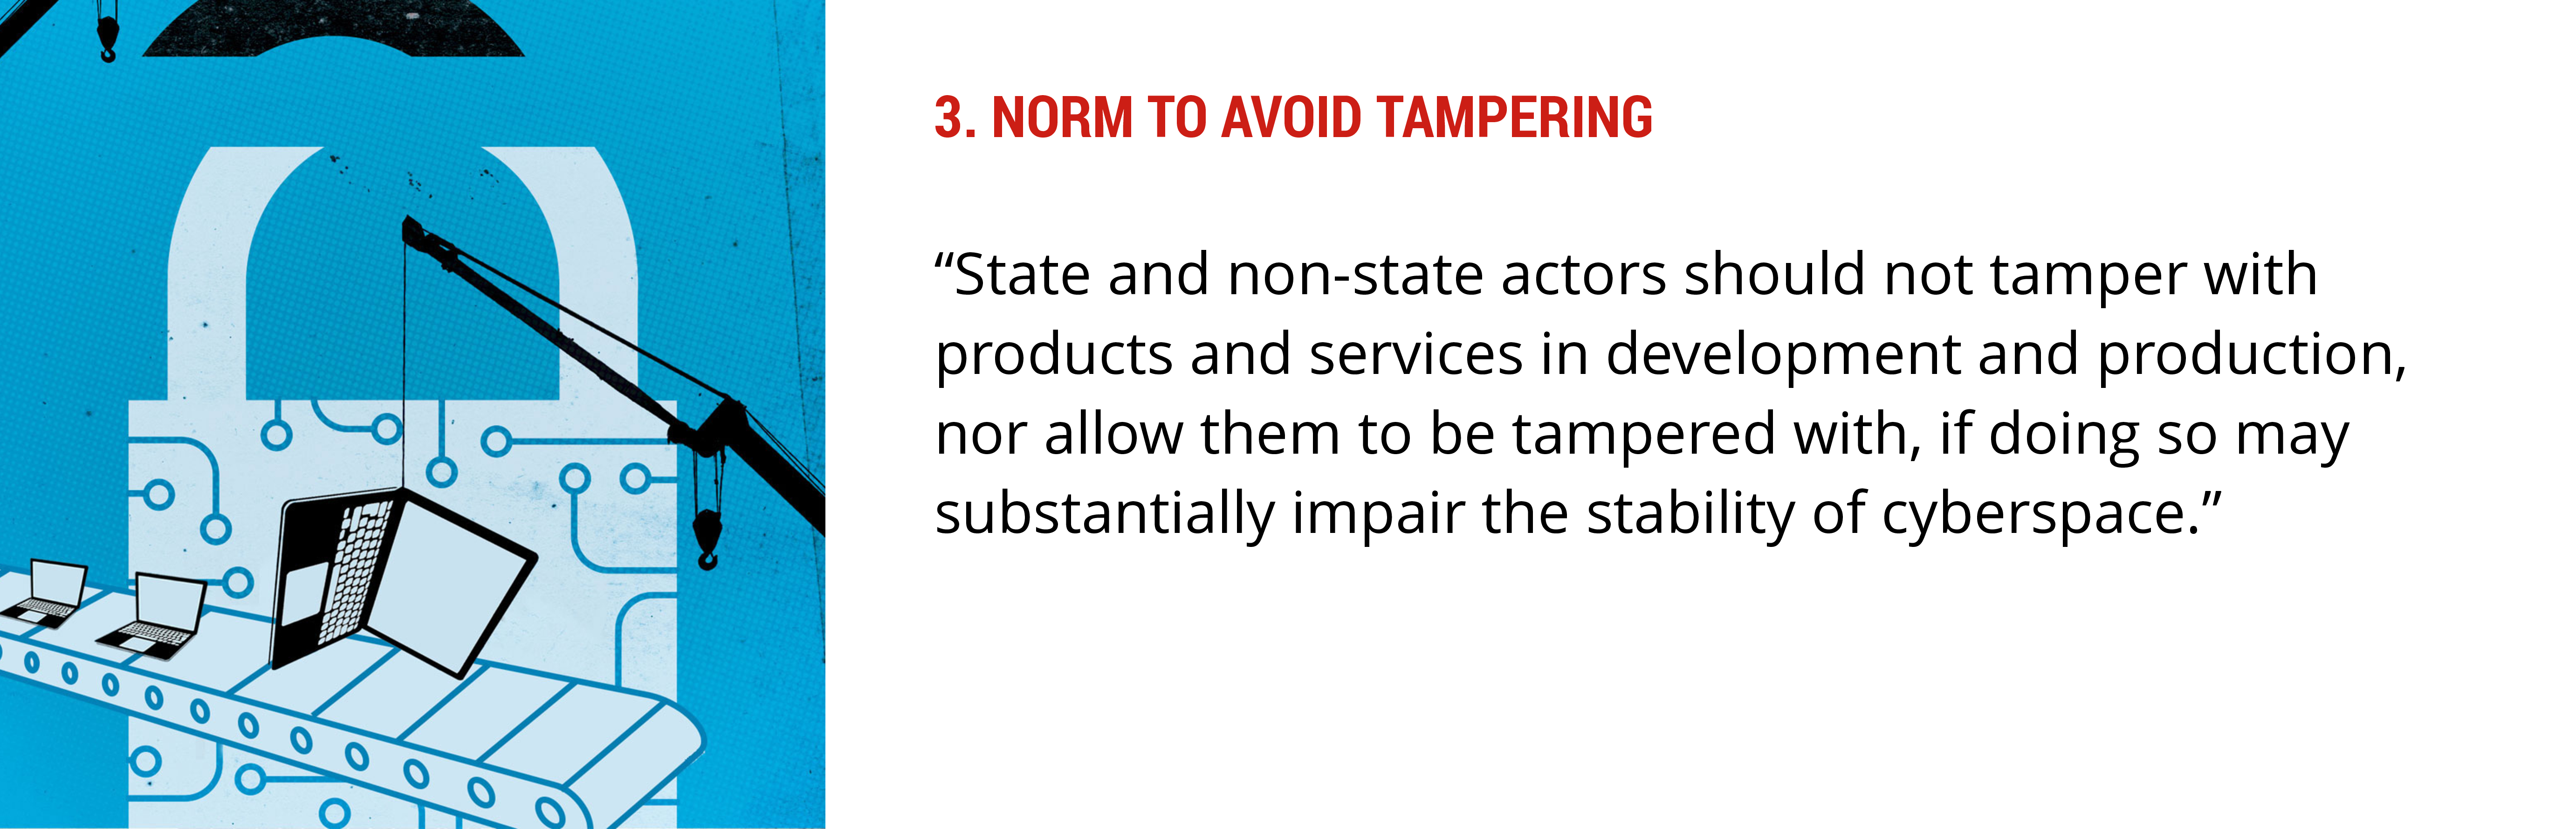 Norm to Avoid Tampering 